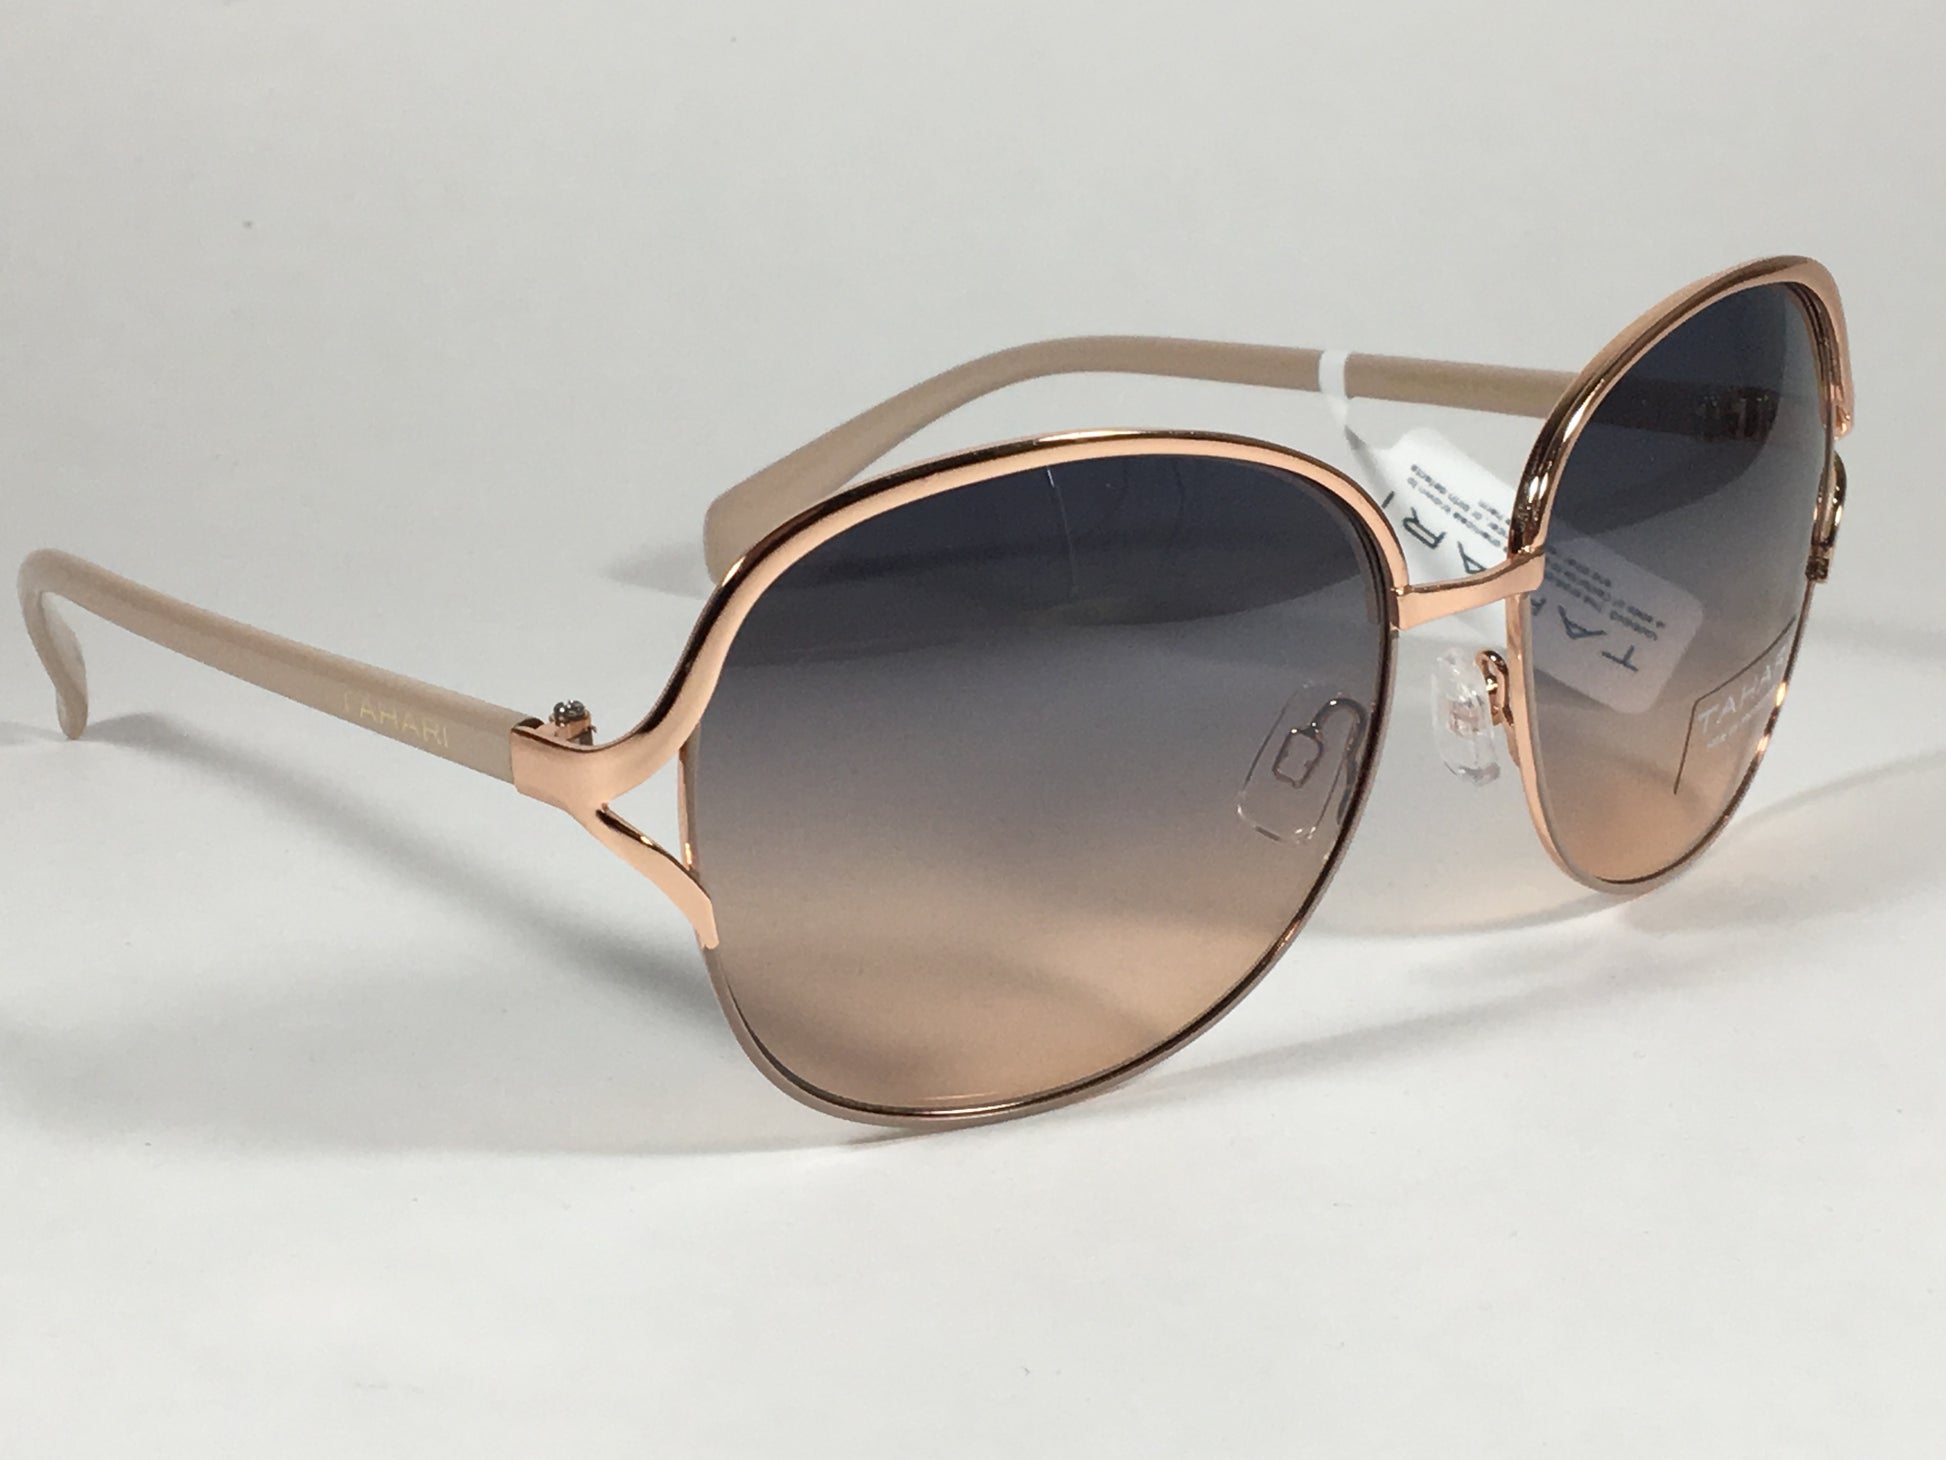 Tahari Butterfly Round Sunglasses Rose Gold Nude Blue Gradient Lens Th699 Ndrgd - Sunglasses